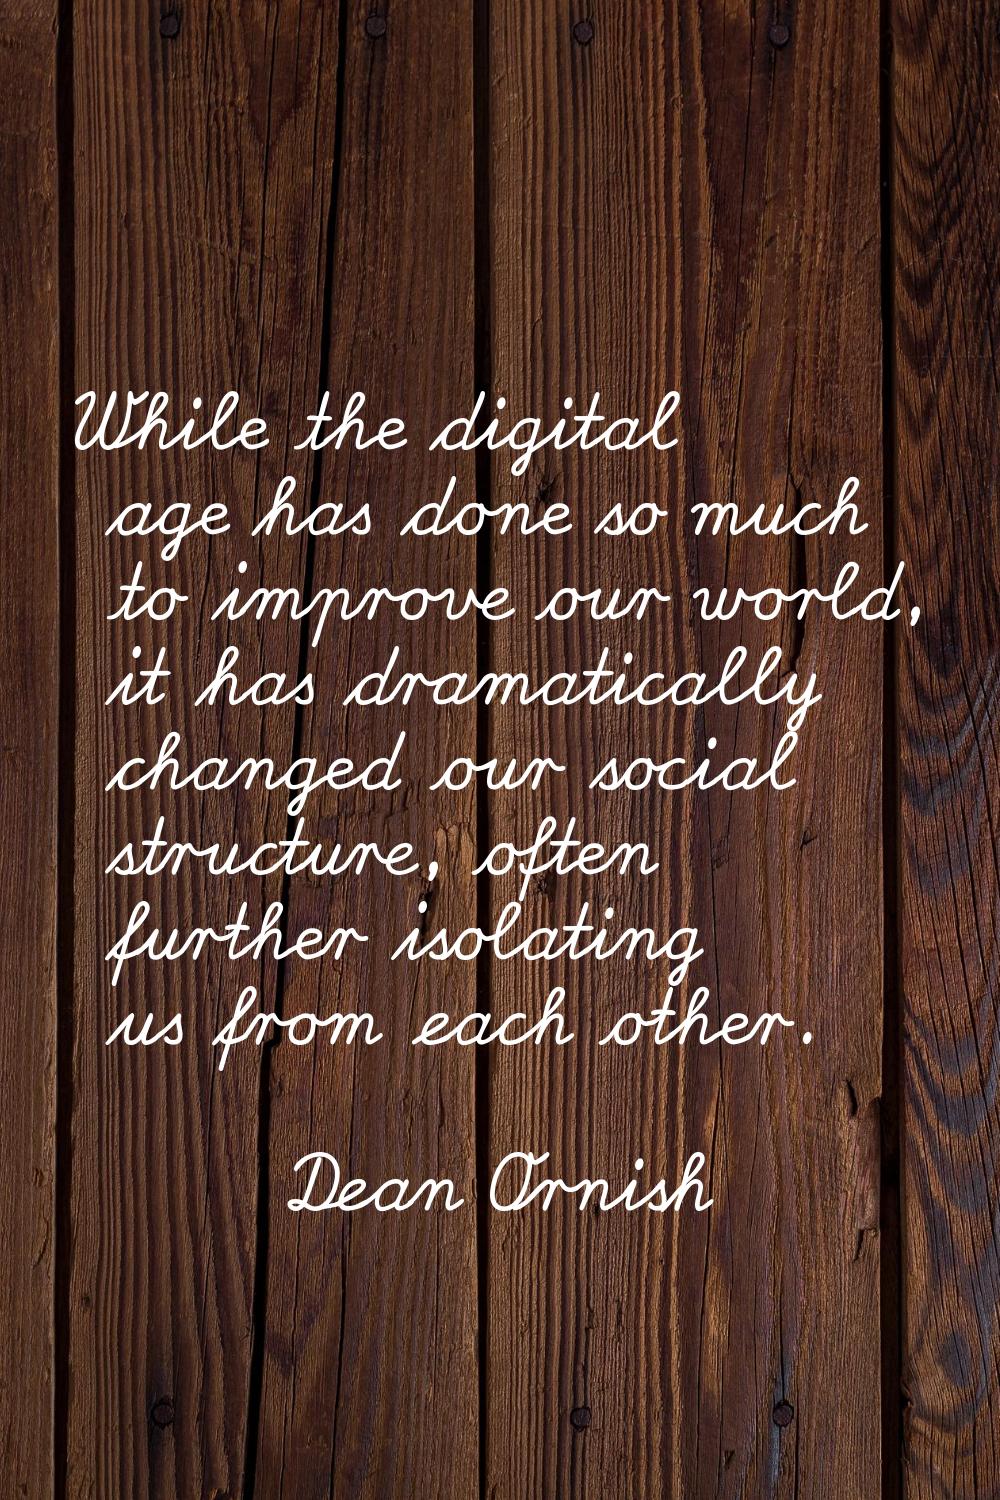 While the digital age has done so much to improve our world, it has dramatically changed our social